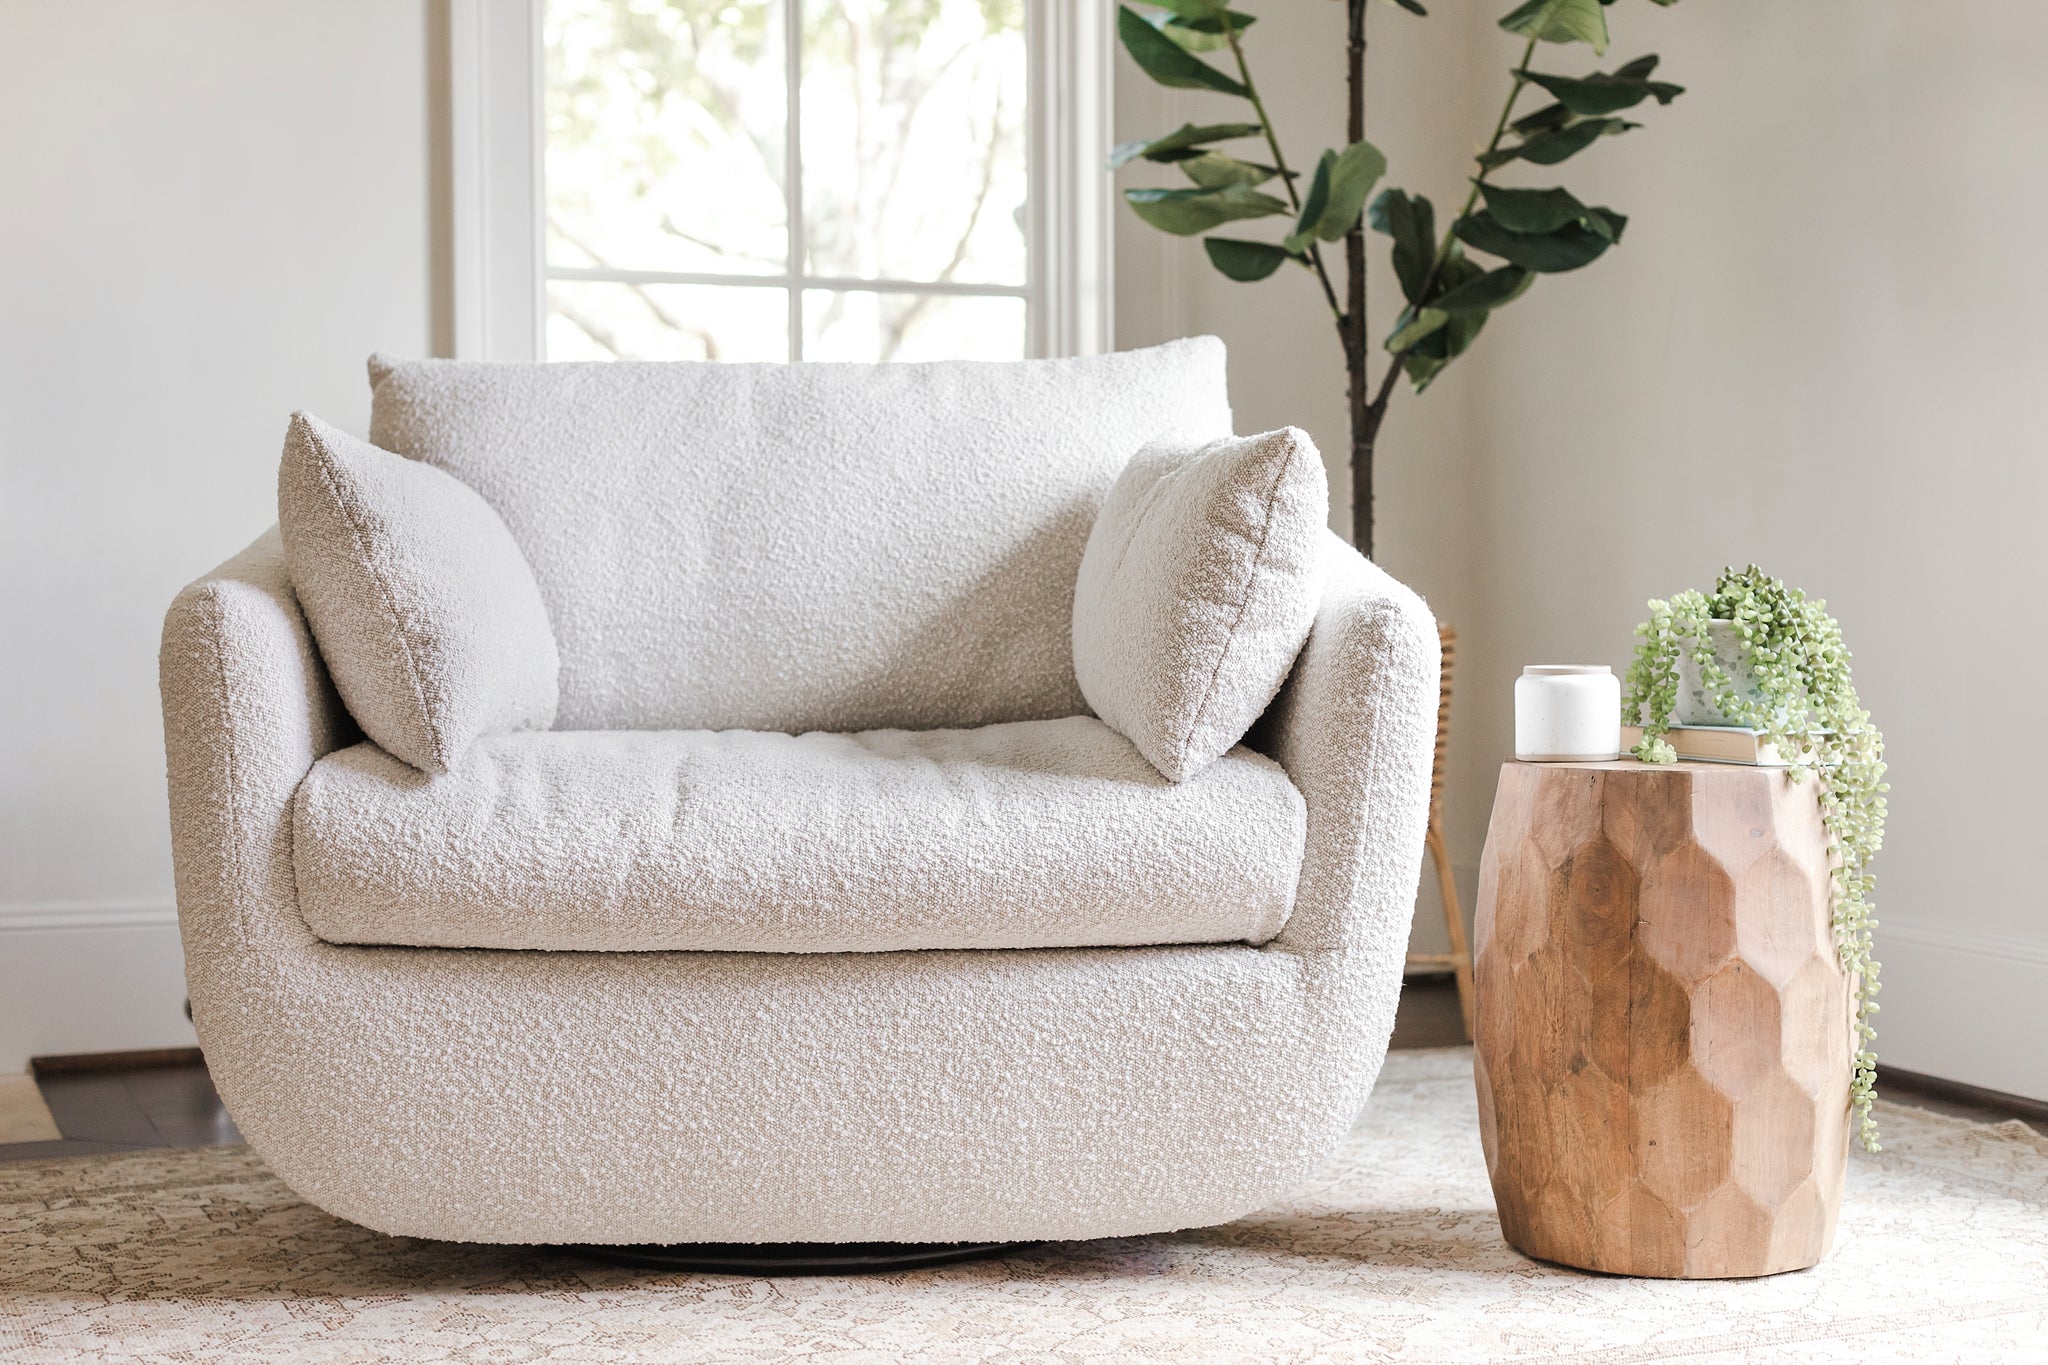 park swivel accent chair in boucle fabric in a living room setting